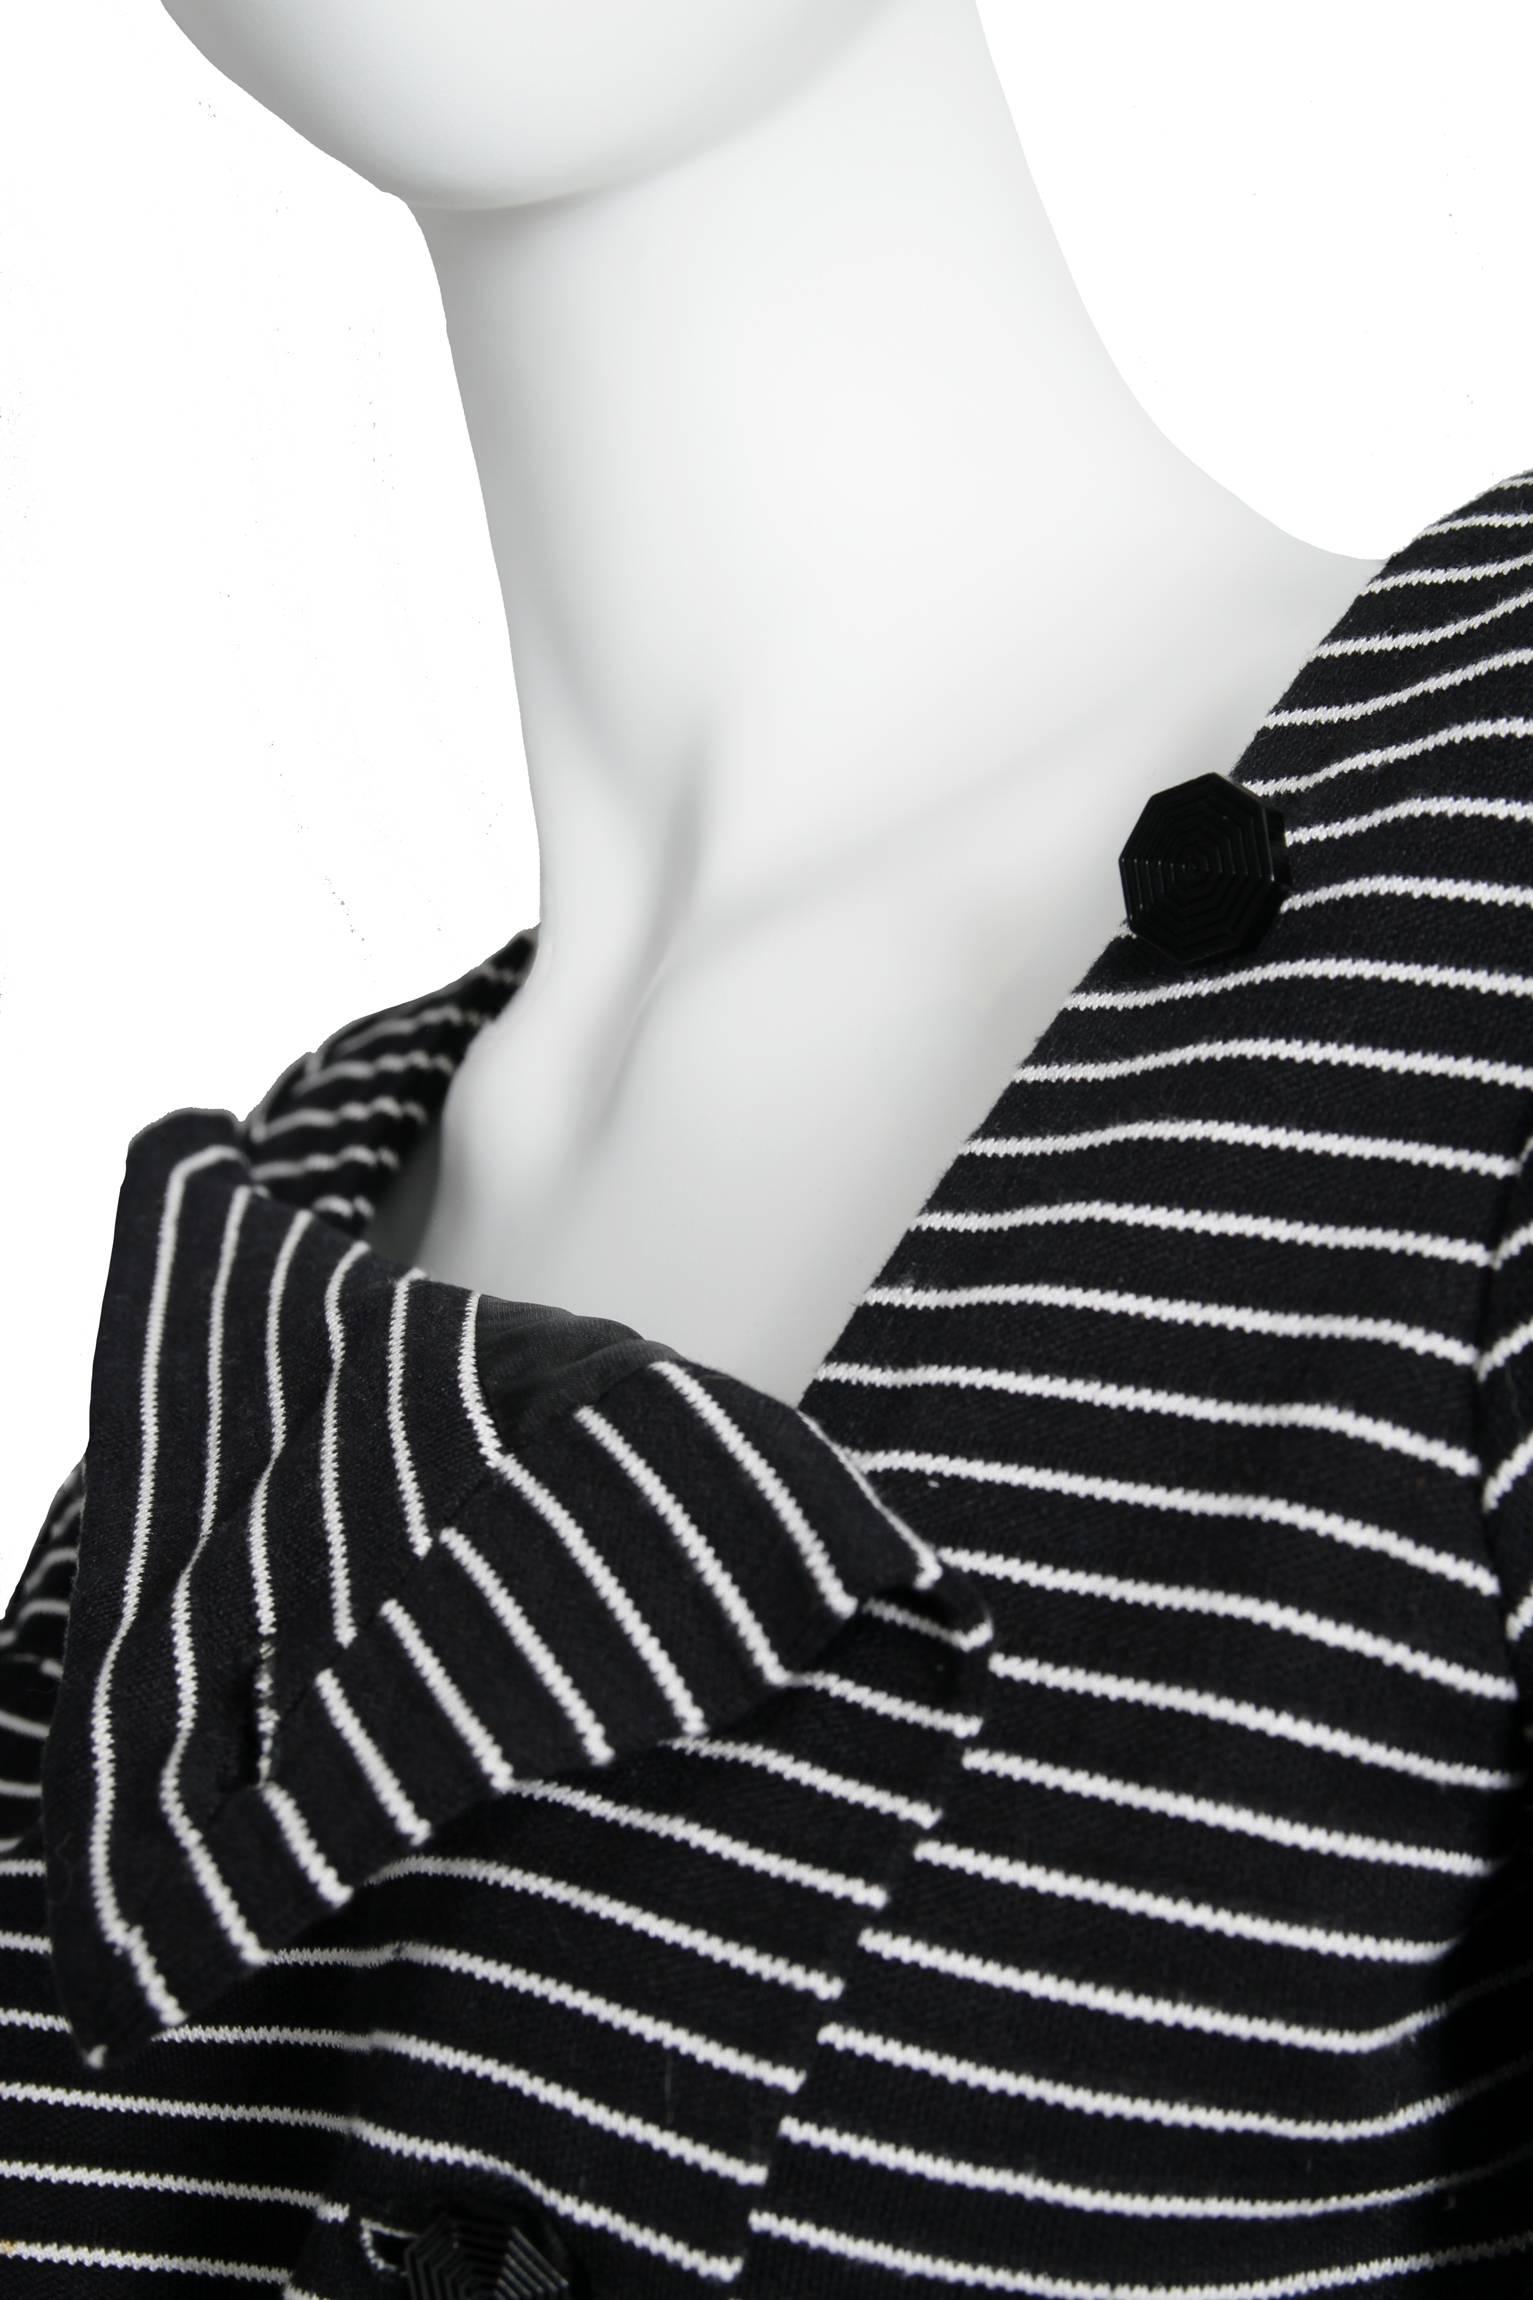 1980s Yves Saint Laurent Striped Wool Dress  For Sale 2